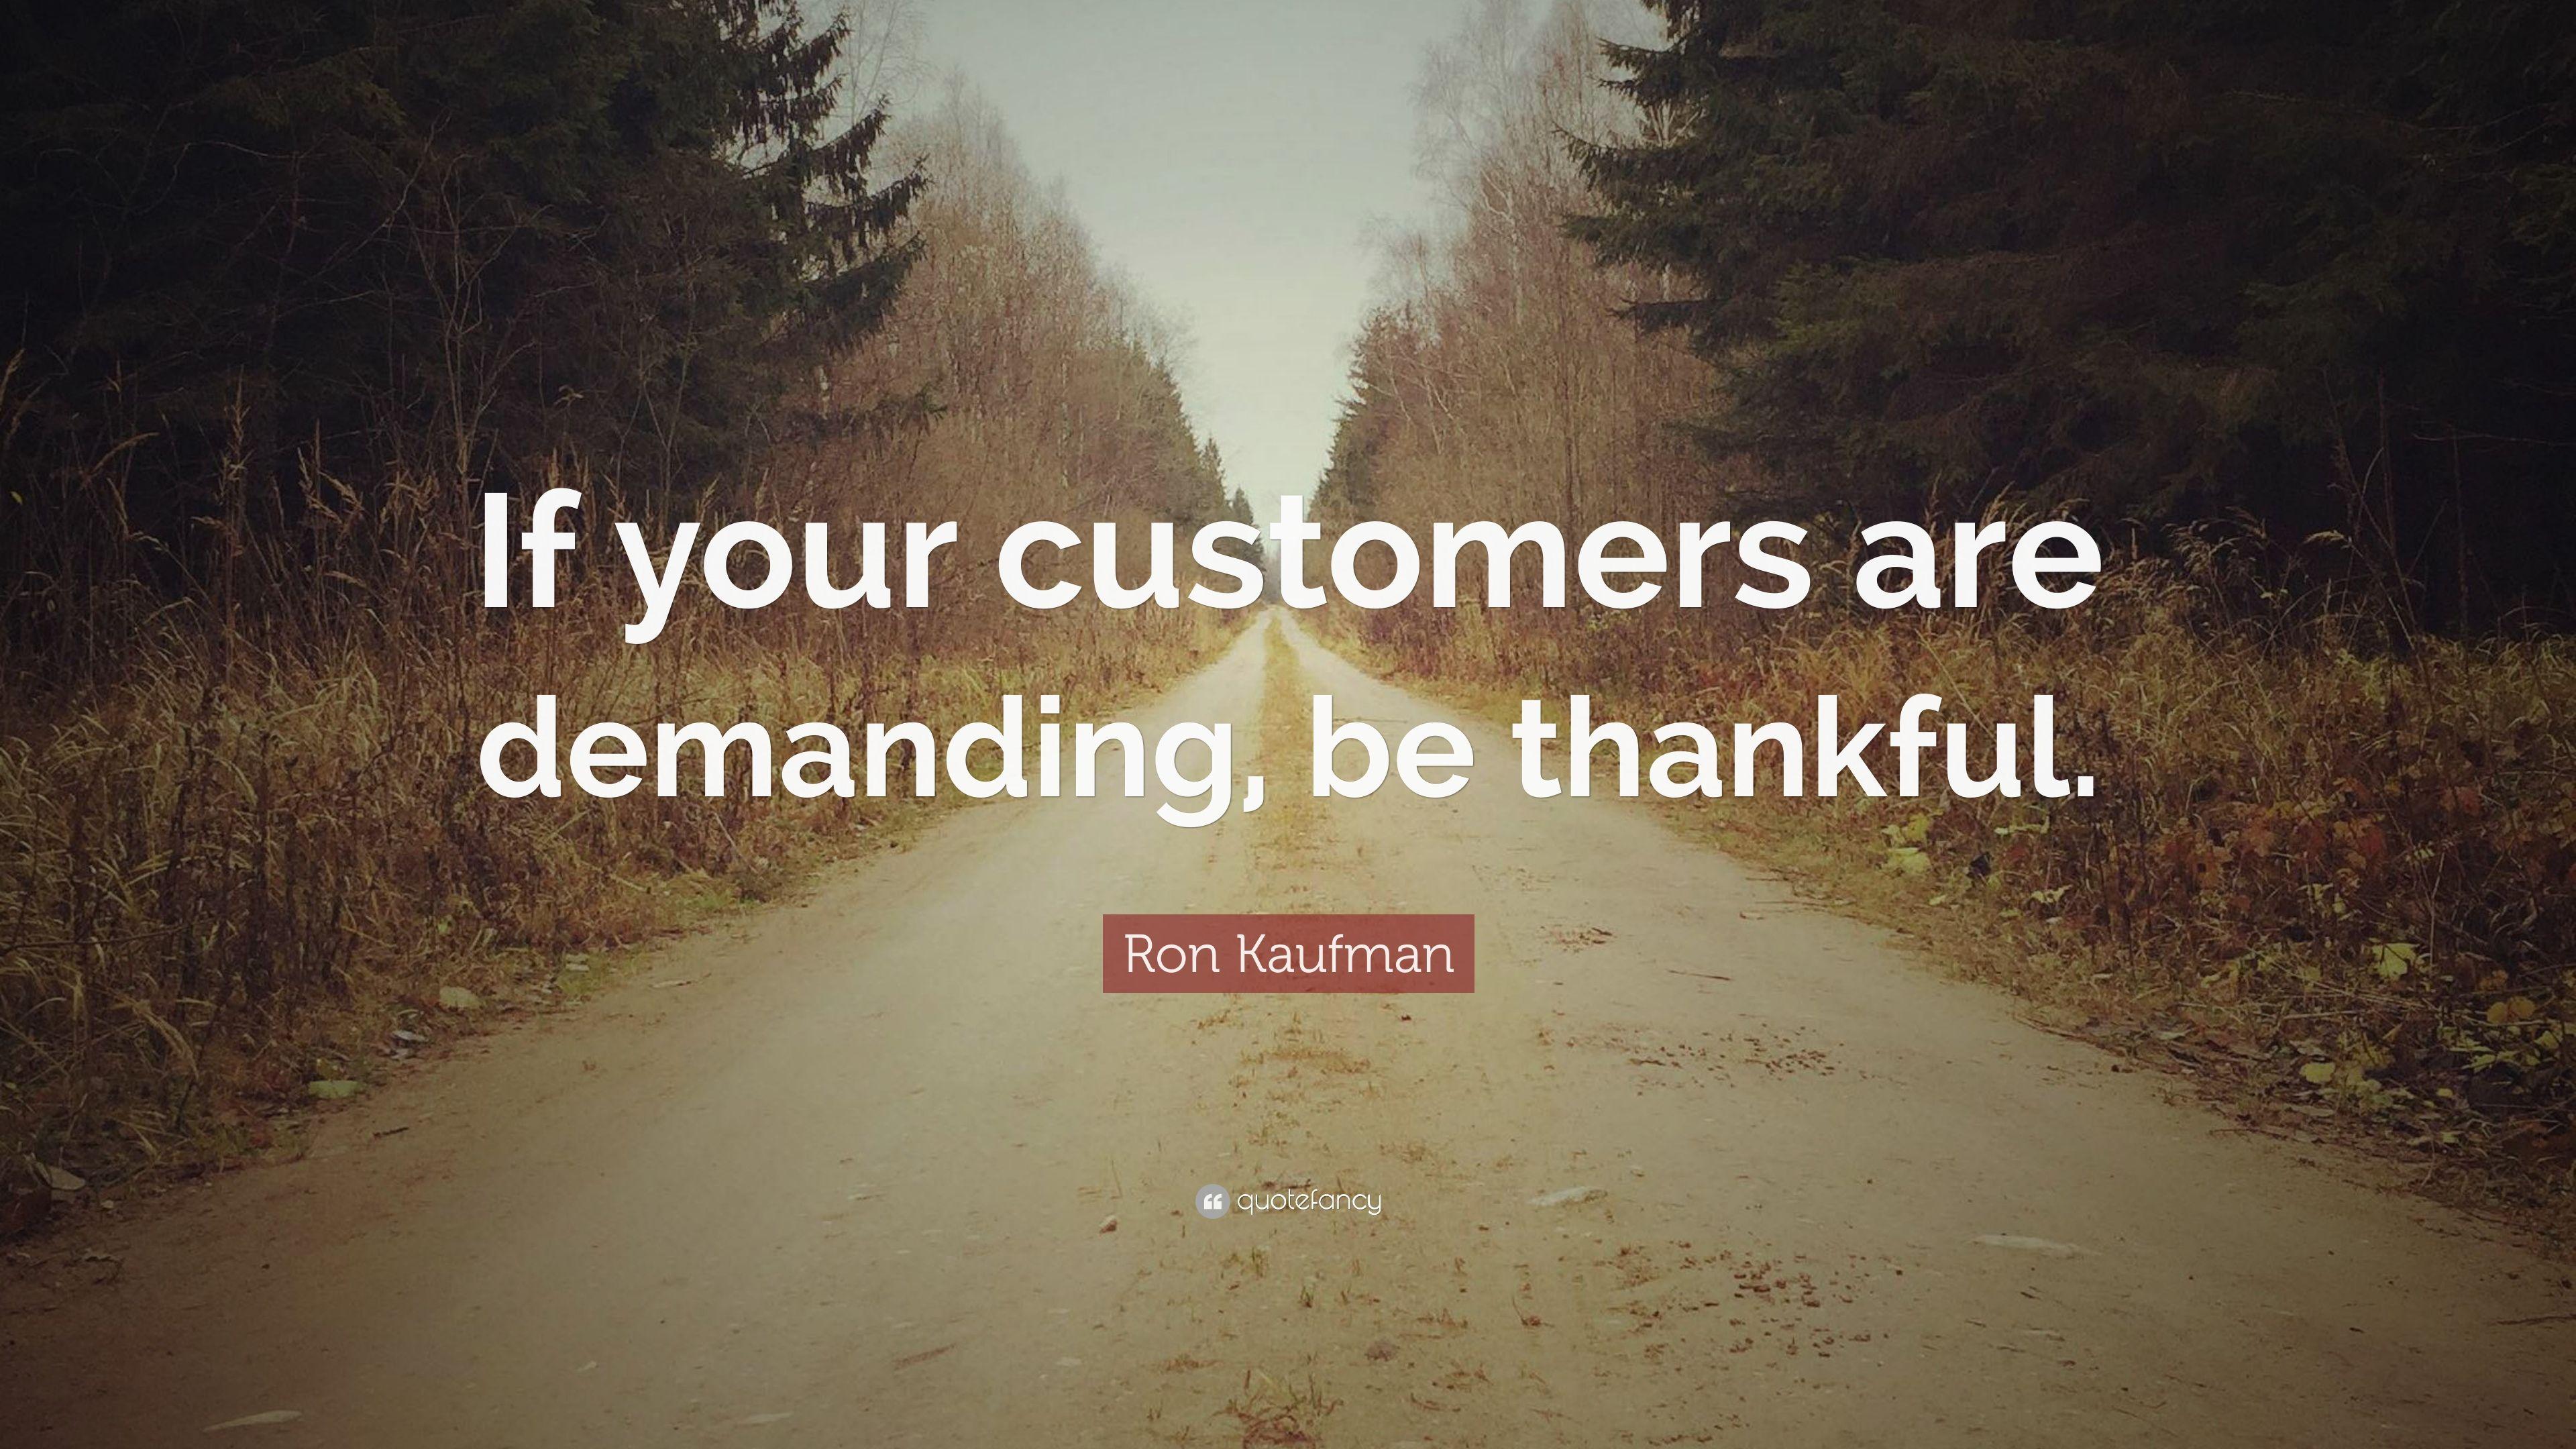 Ron Kaufman Quote: “If your customers are demanding, be thankful